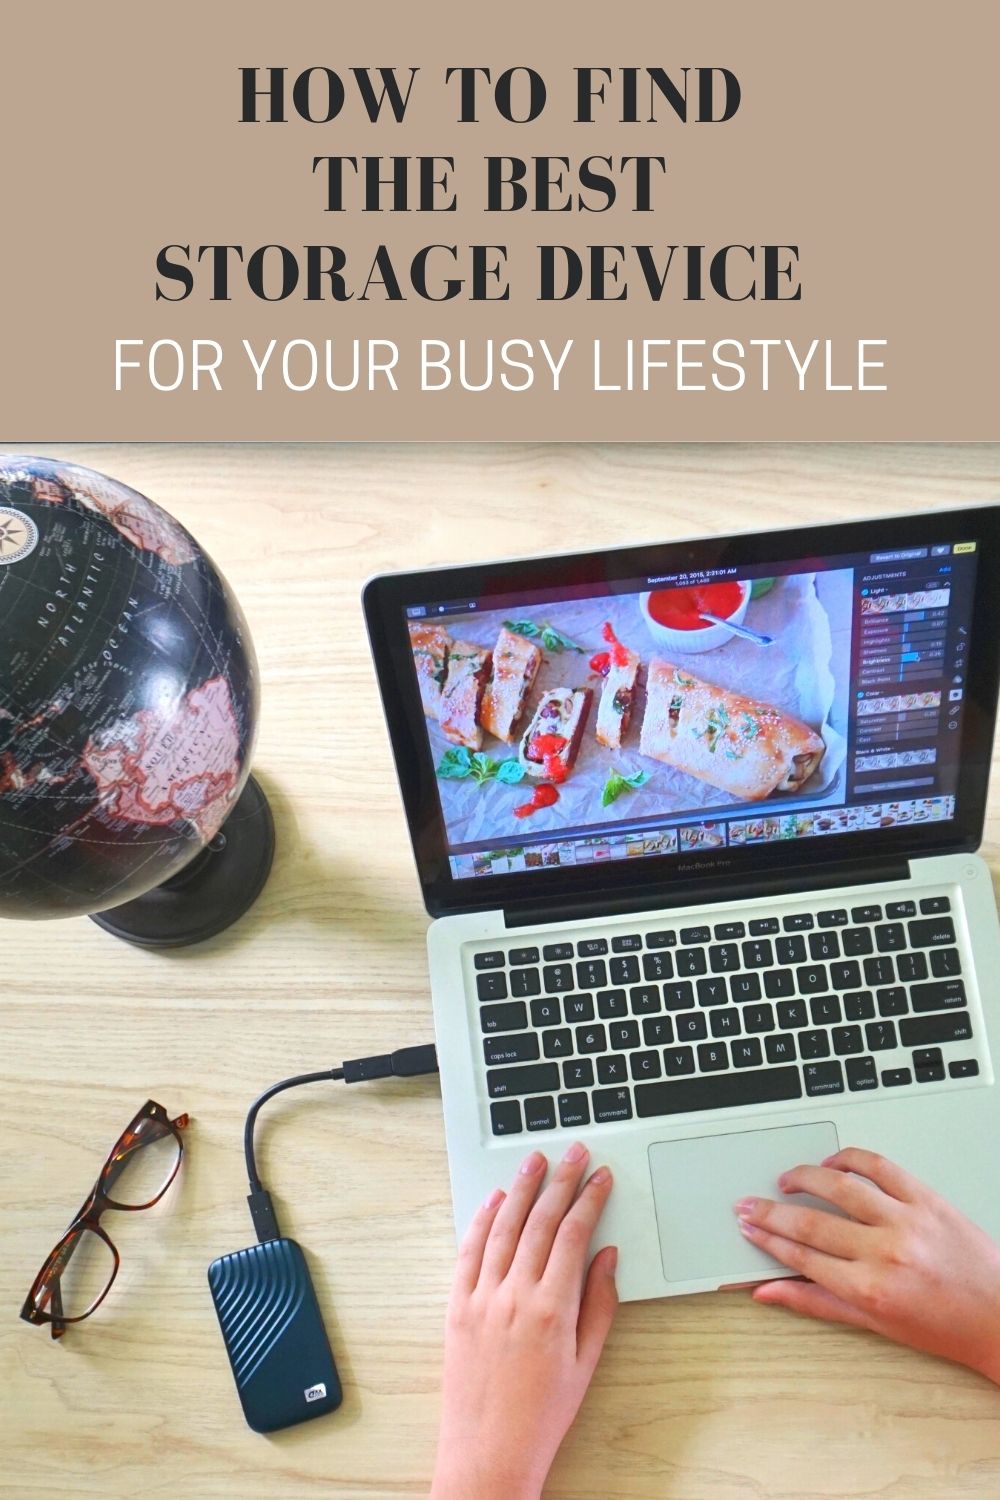 Best storage device for a busy lifestyle